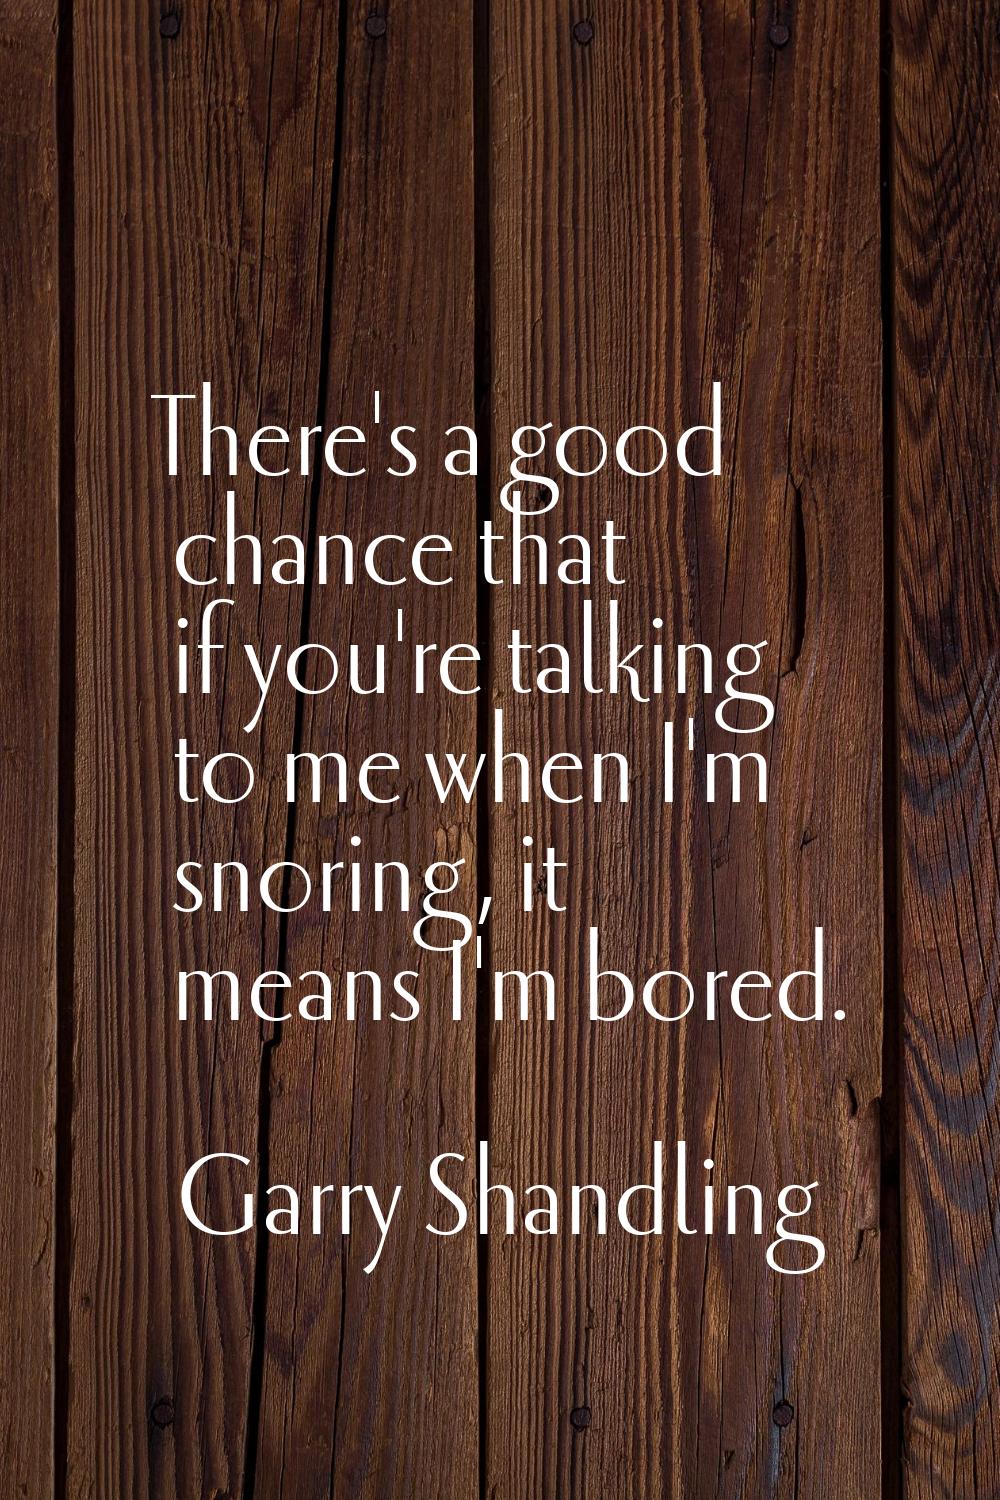 There's a good chance that if you're talking to me when I'm snoring, it means I'm bored.